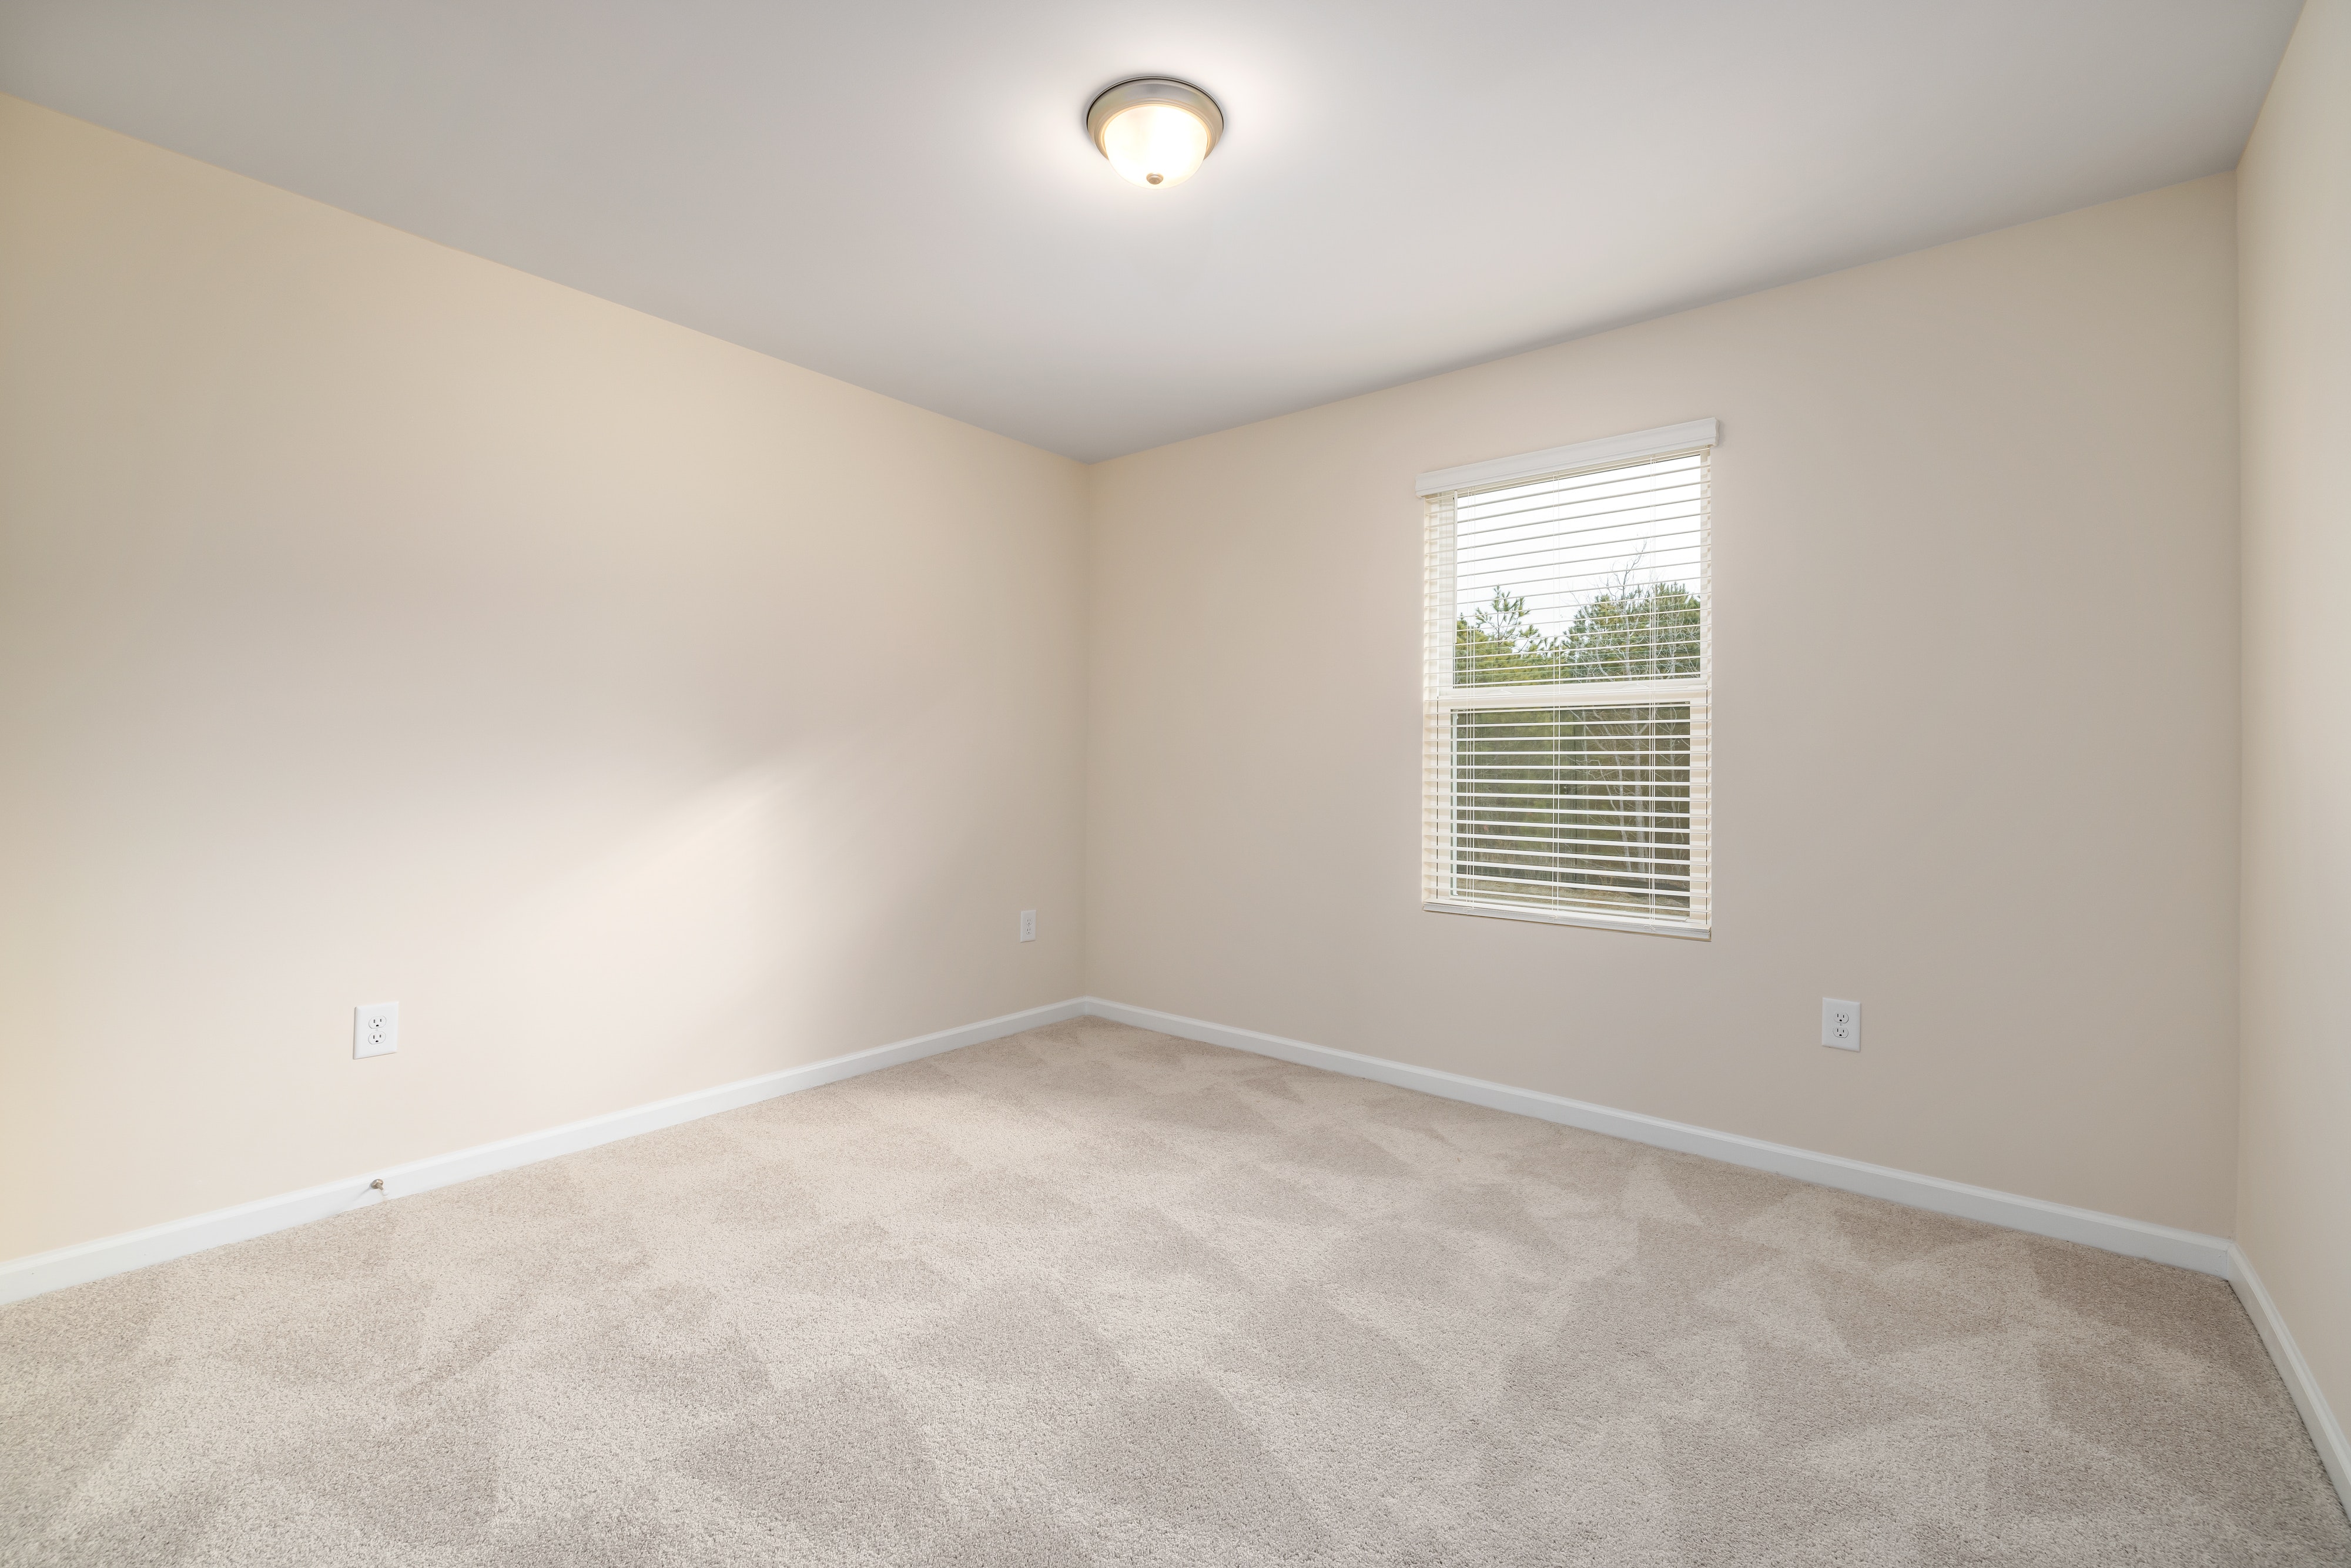 Room after carpet cleaning Chem-Dry of Seattle Seattle (206)783-1003